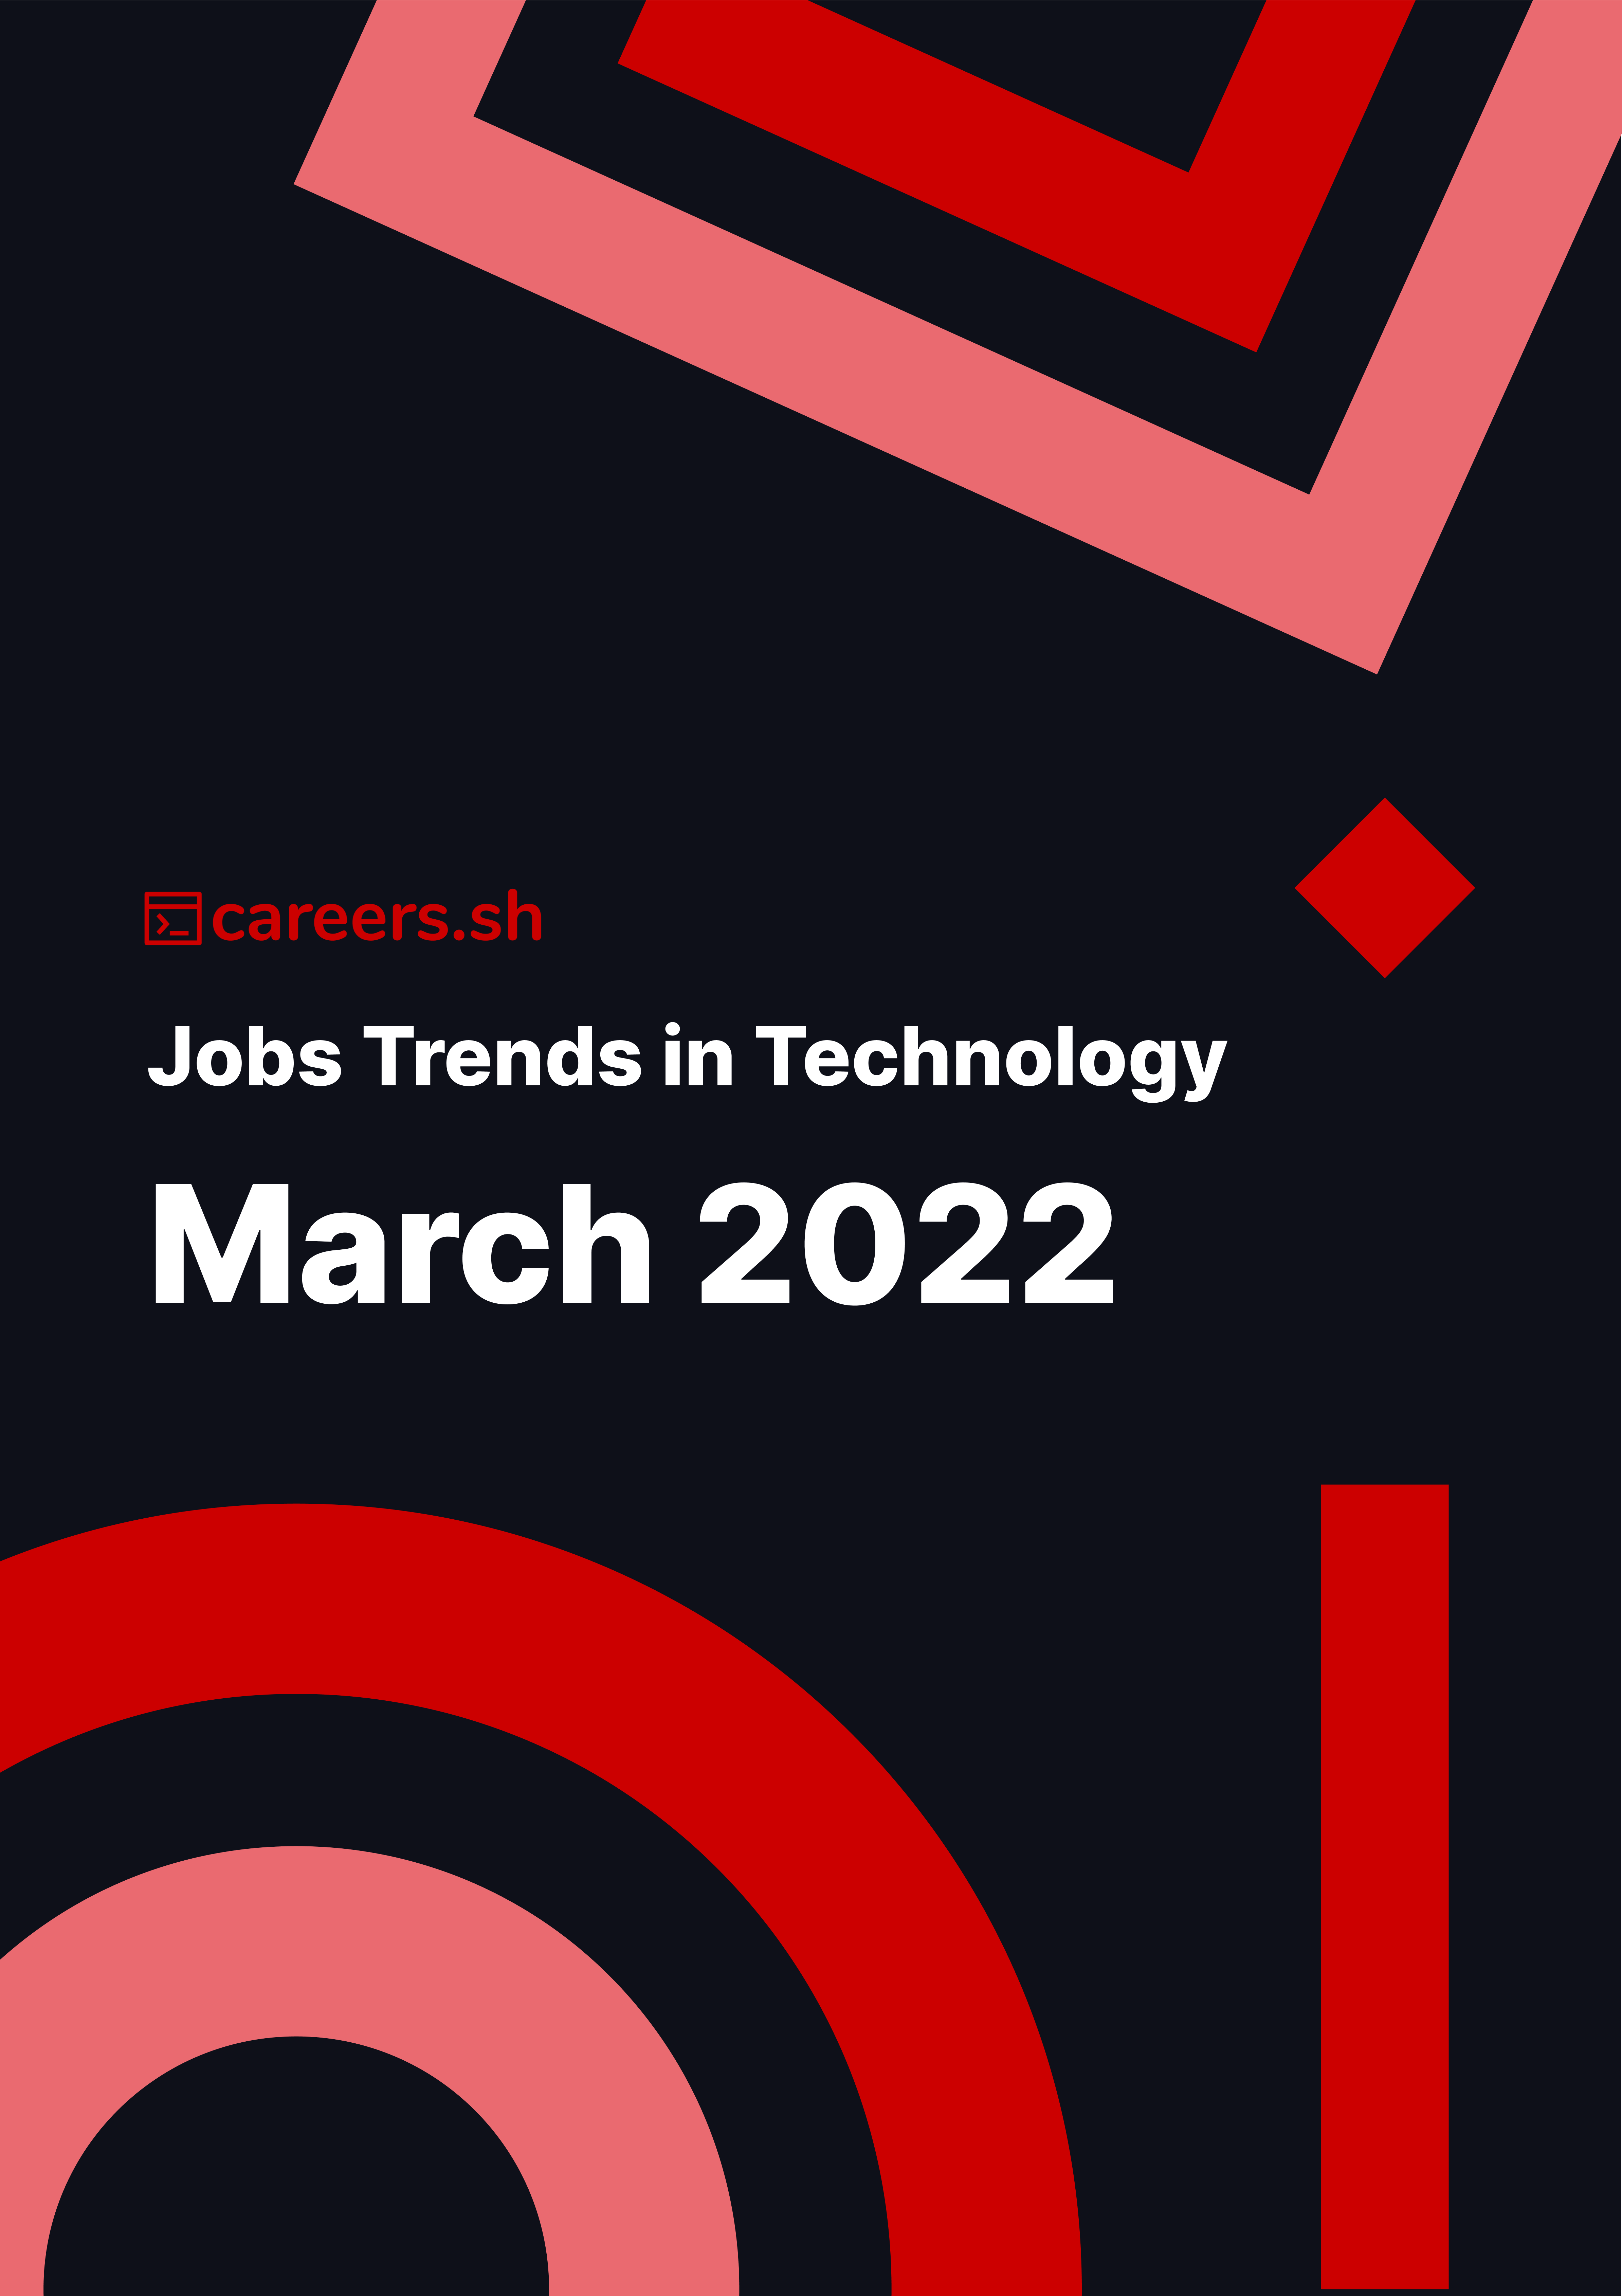 Careers.sh - March 2022